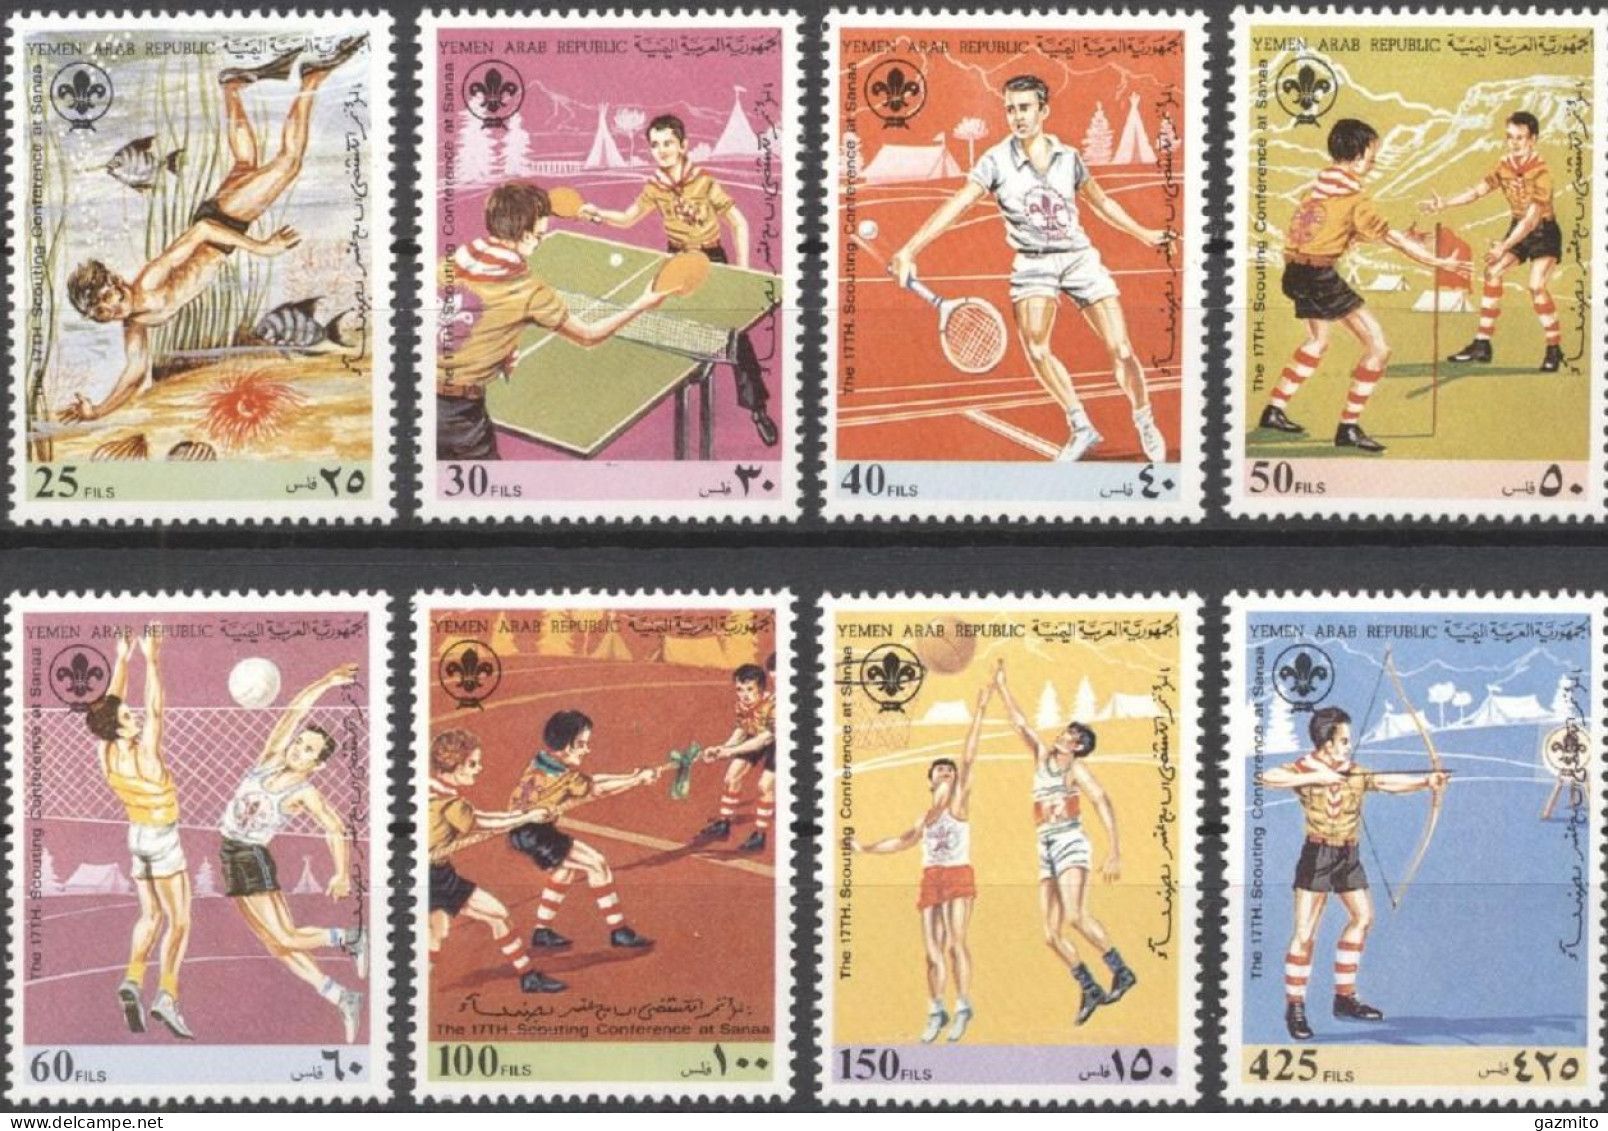 Yemen 1988, Diving, Volleyball, Tennis Table, Tennis, Scout, Basketball, Archery, 8val - Archery